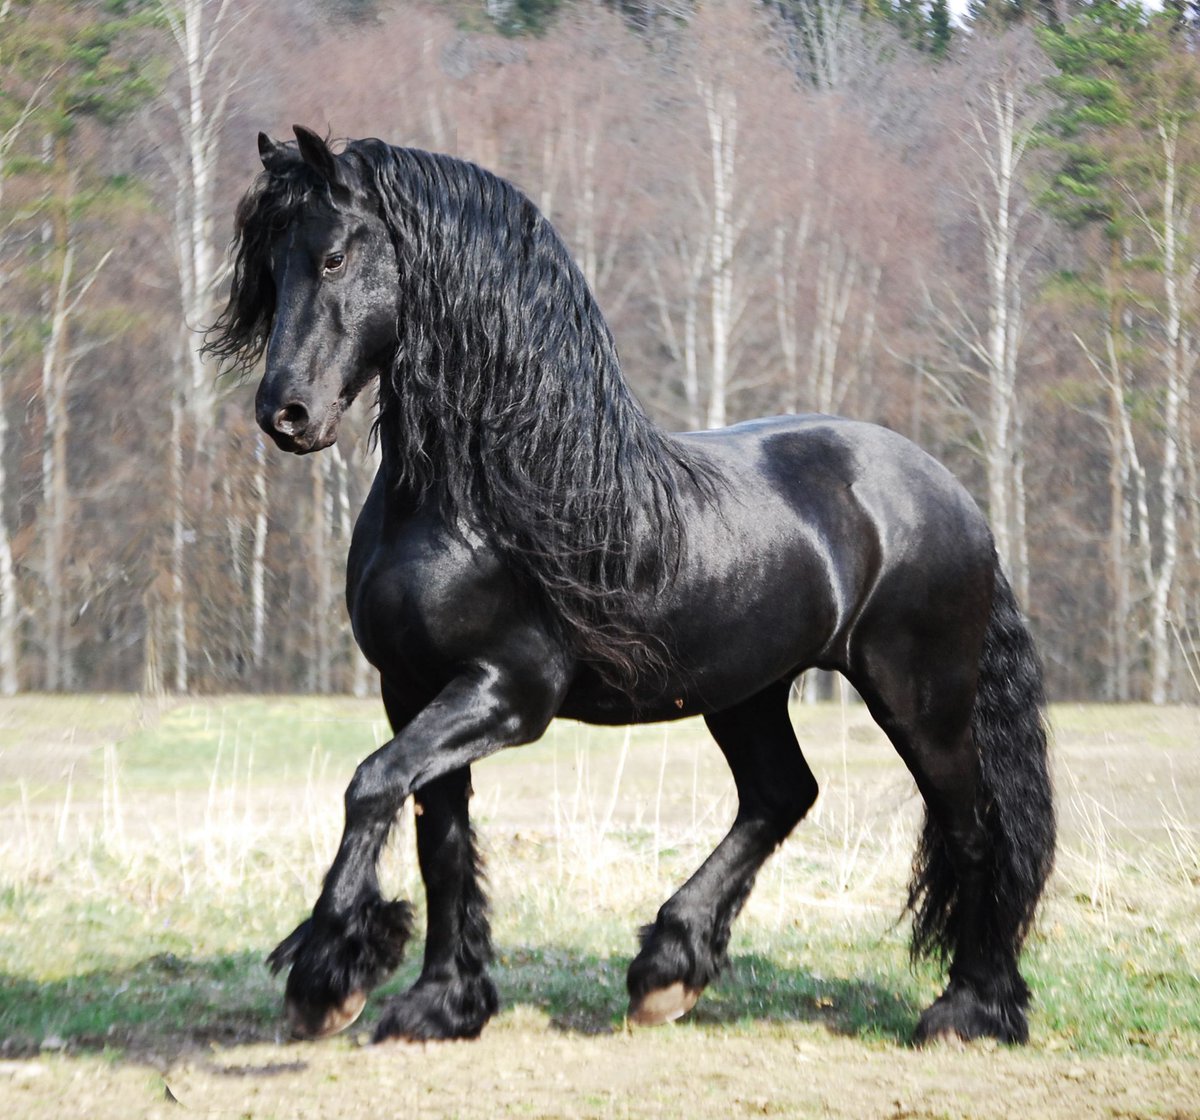 And the man himself, Adam: Friesian - sturdy, muscular body, wavy flowing mane, proud carriage, mostly docile